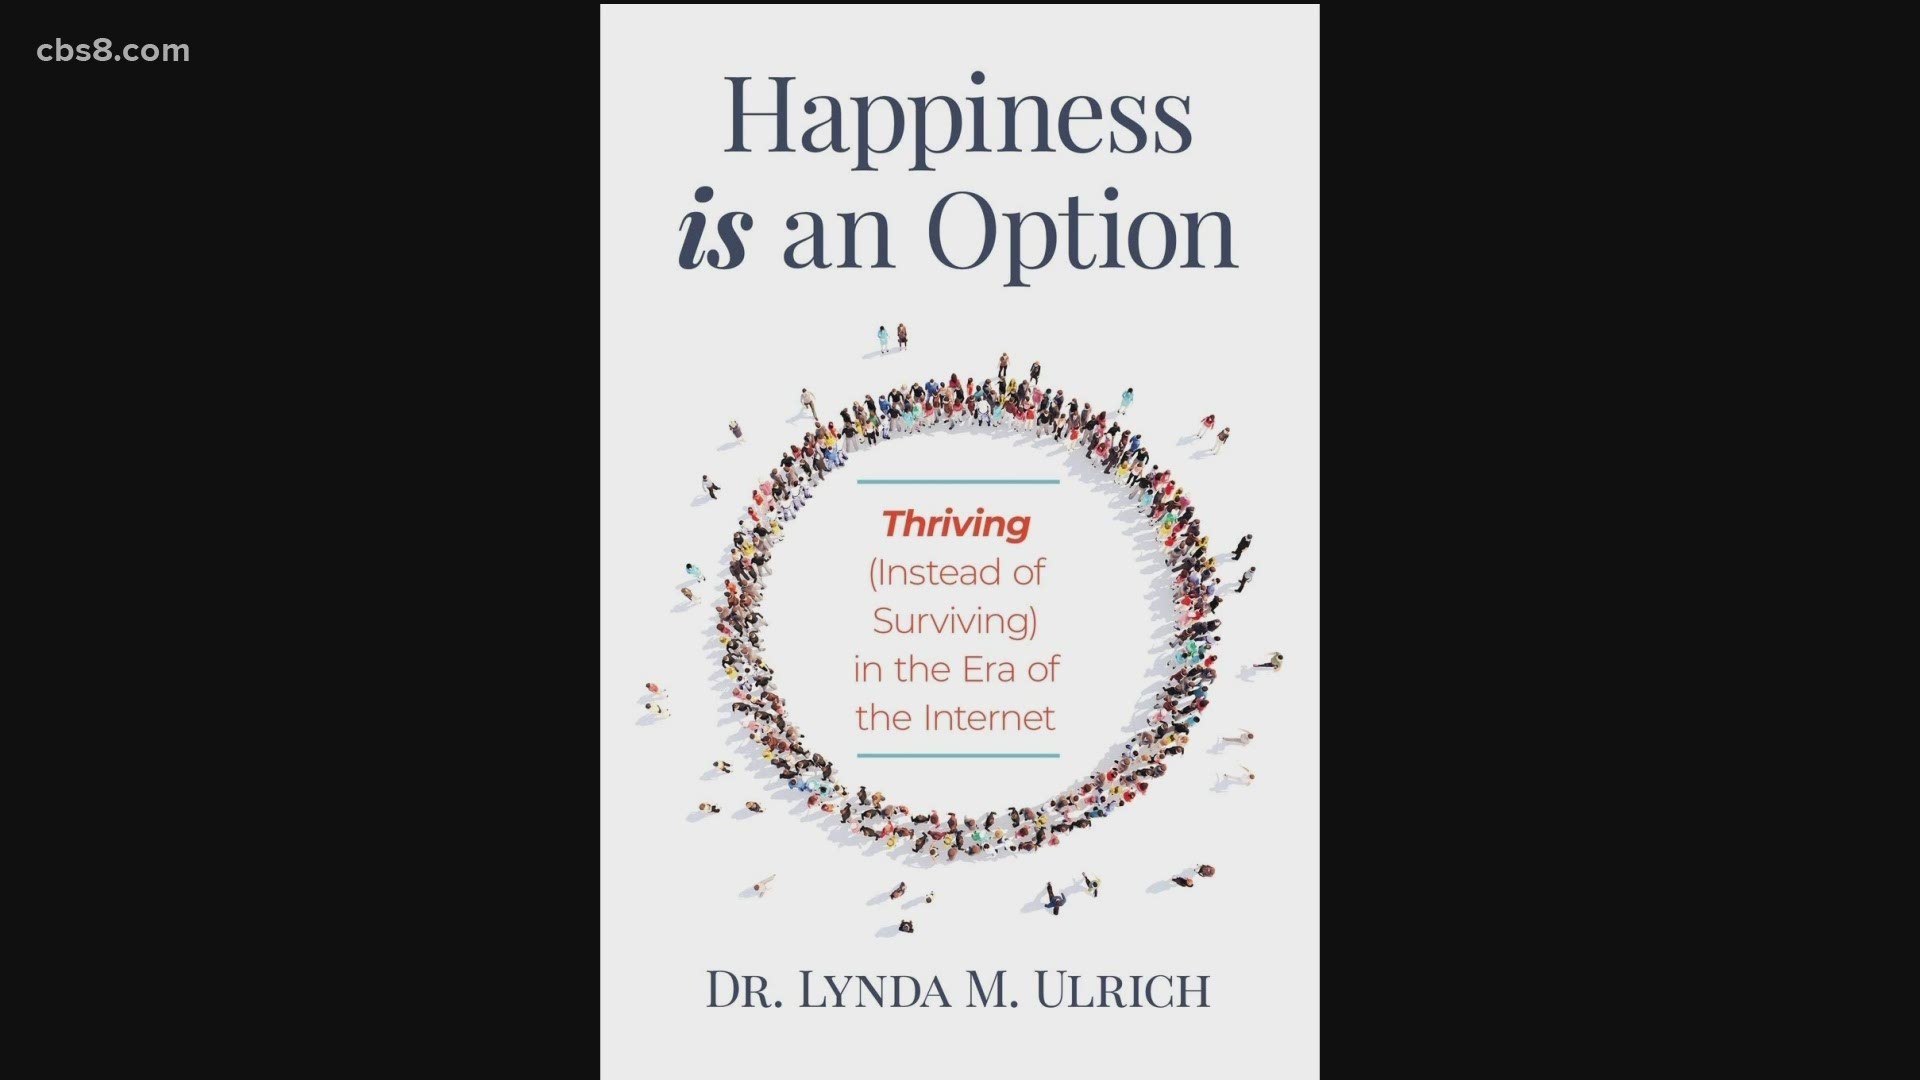 Author and blogger, Dr. Linda Ulrich, reminds us to pay attention to the good in the world and be intentional when we spend time online.